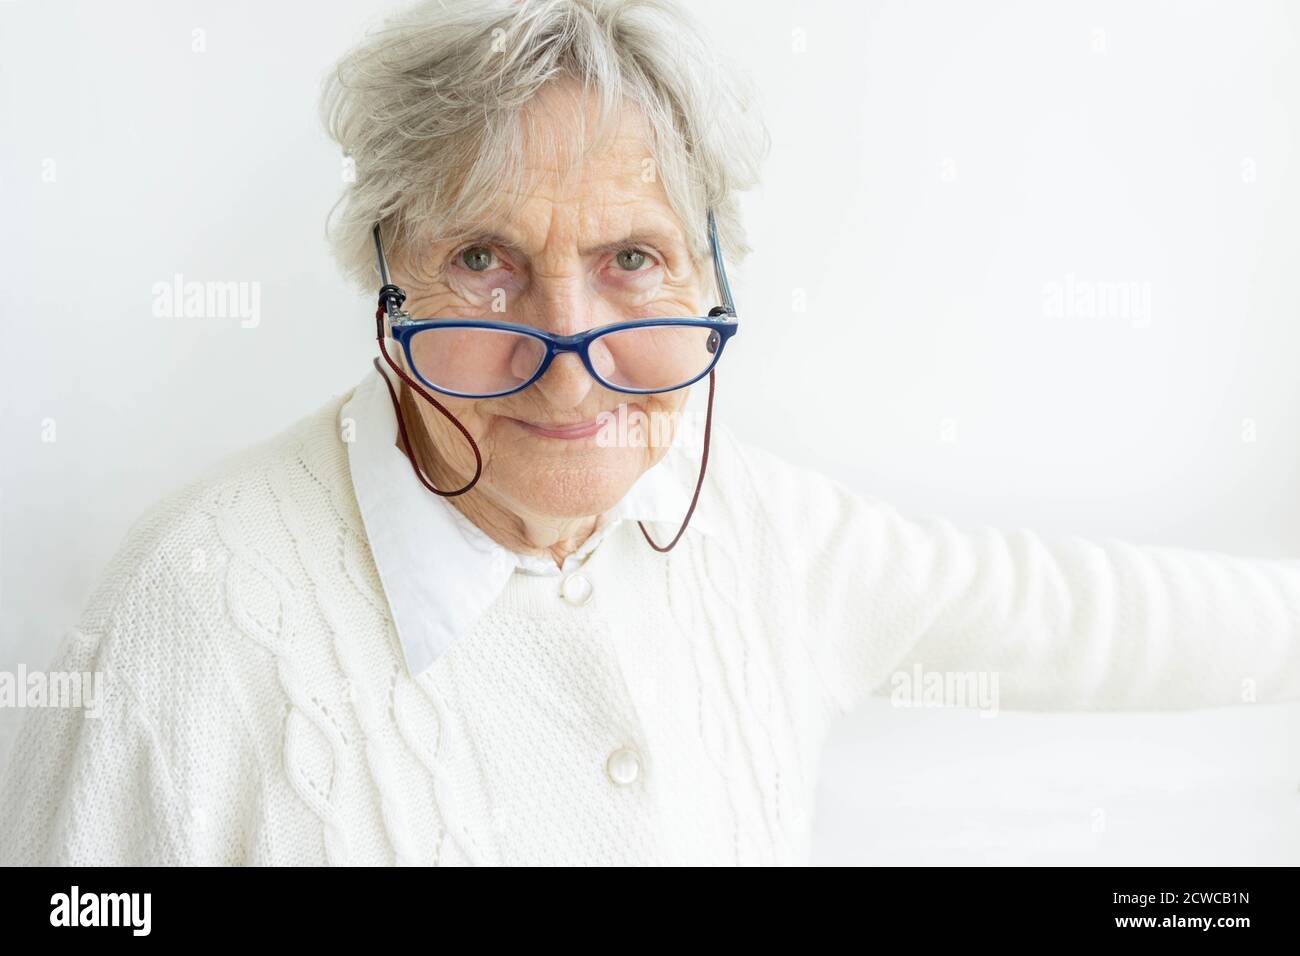 Portrait of senior woman wearing eyeglasses on wall background. Old woman in white sweater looking at camera. Gray hair senior lady in glasses isolate Stock Photo